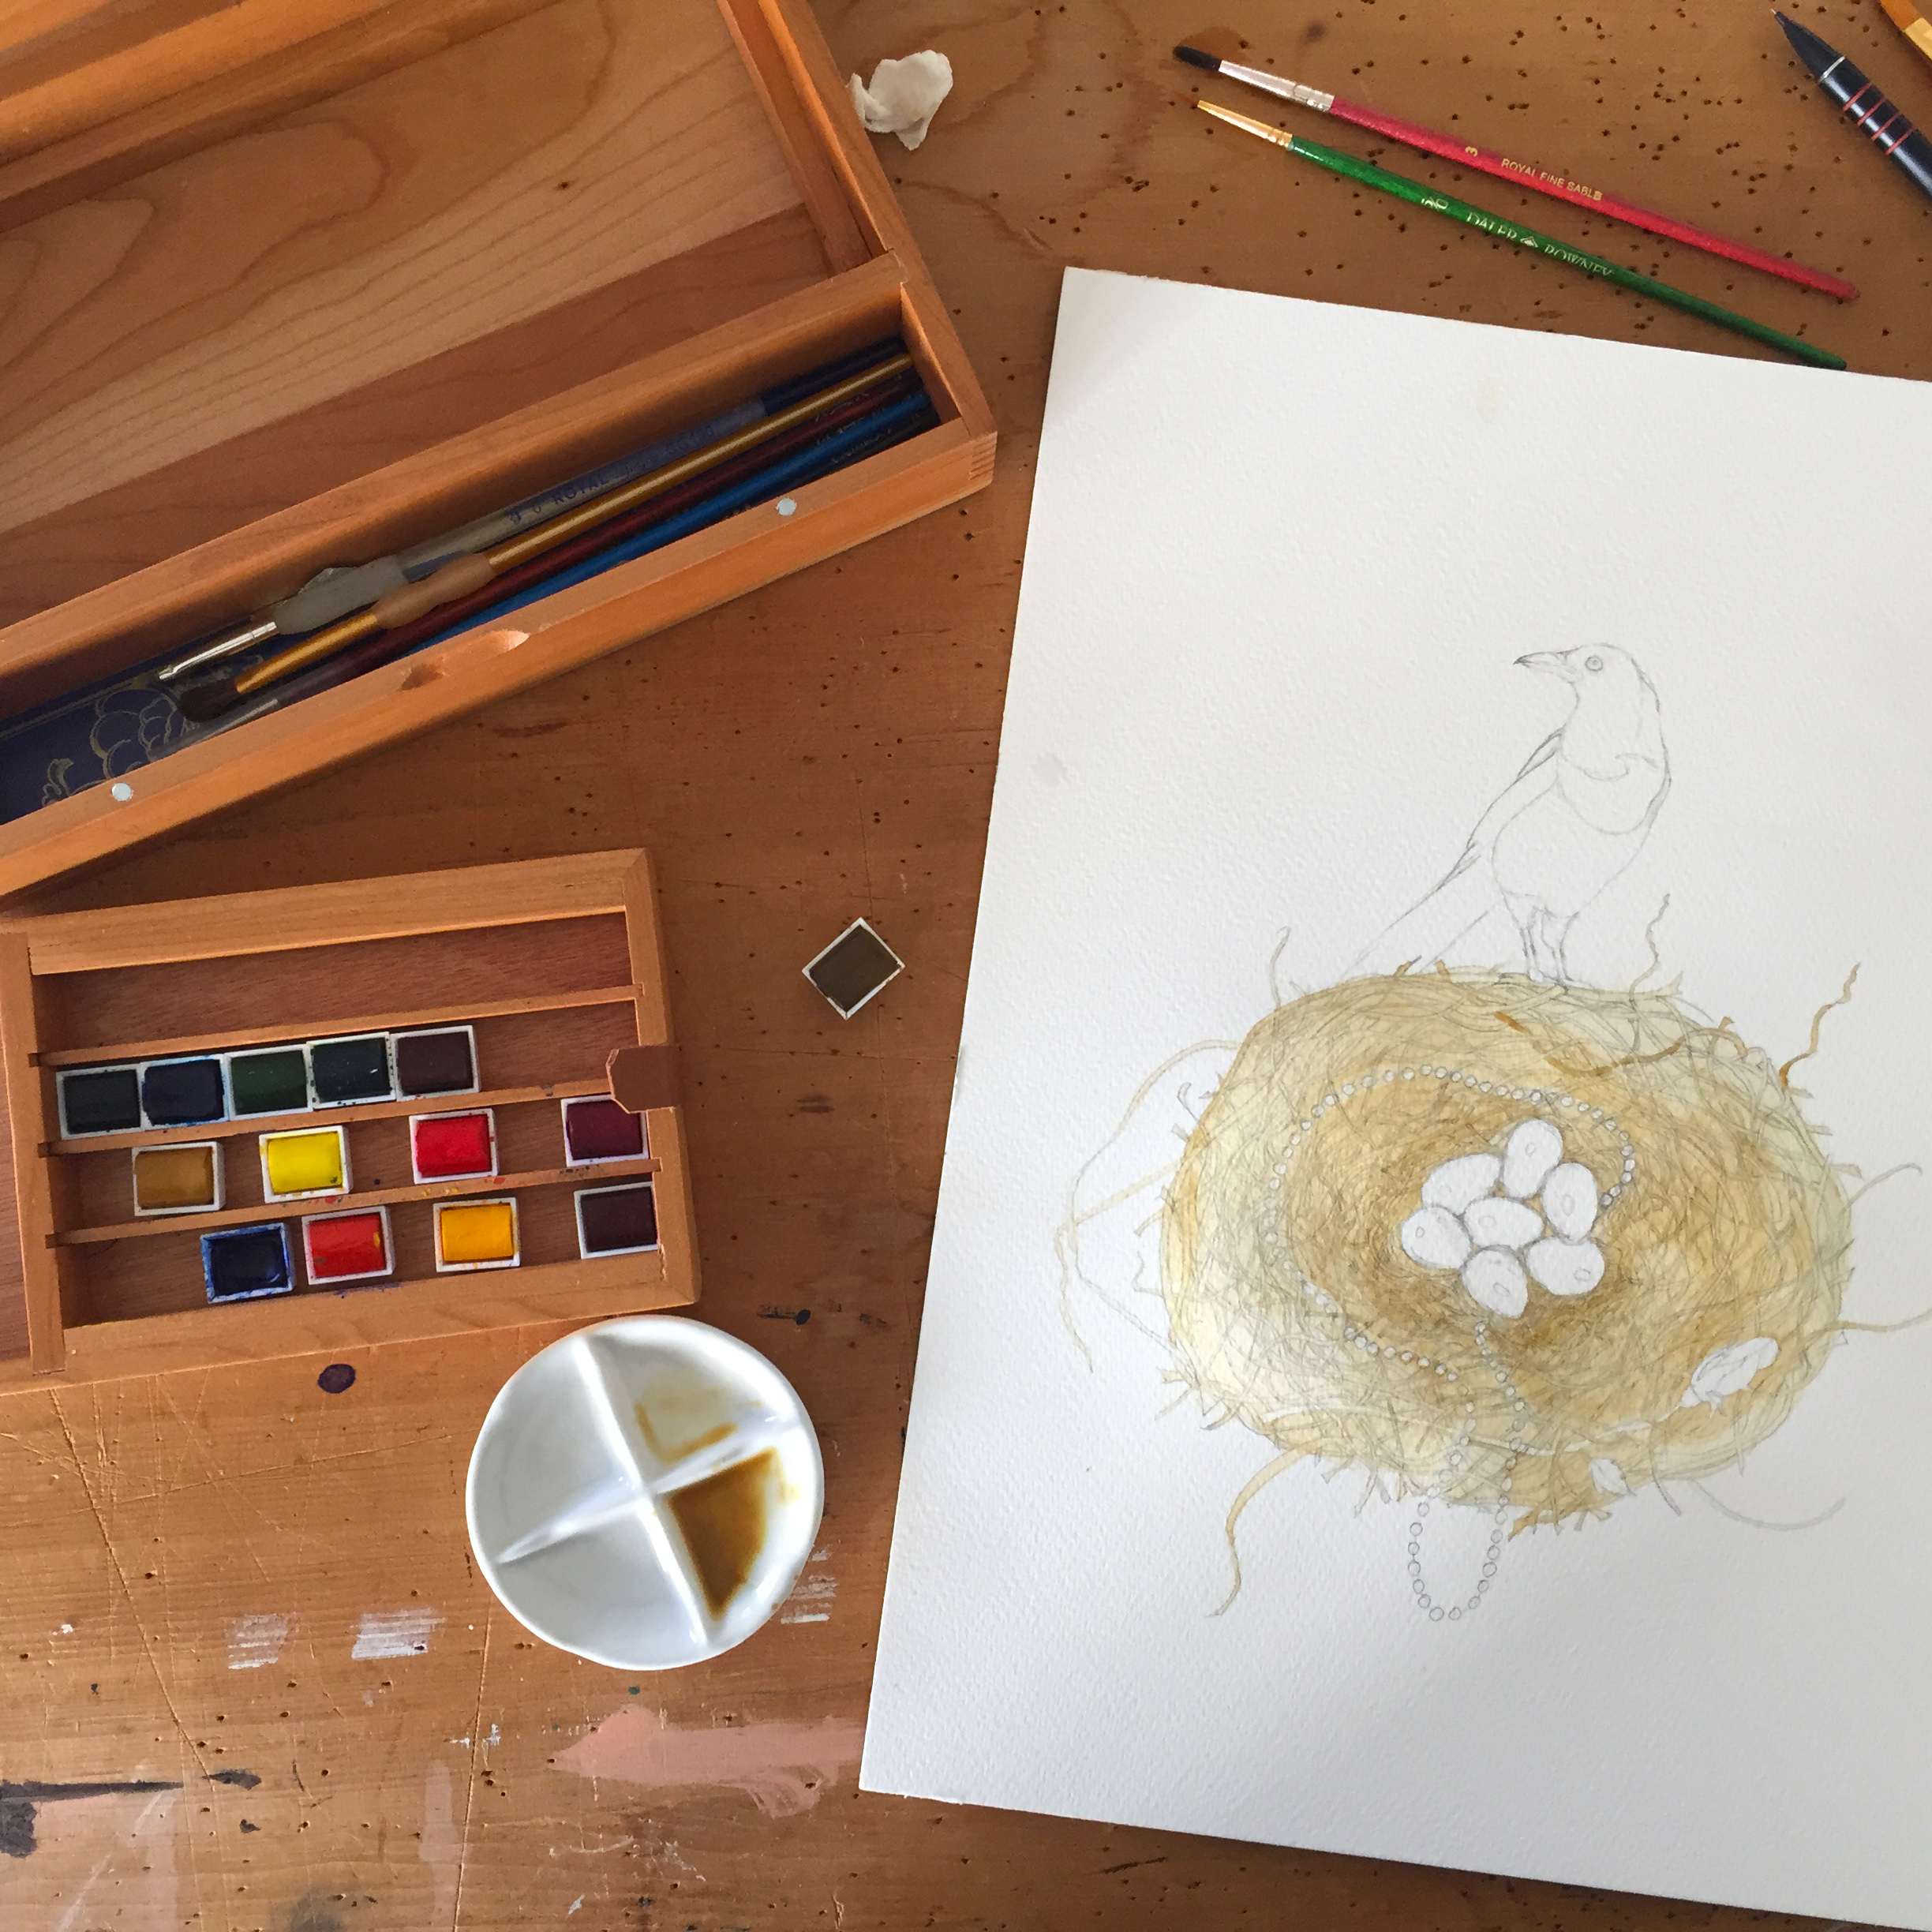 A photograph of the nest in the process of being painted with watercolours